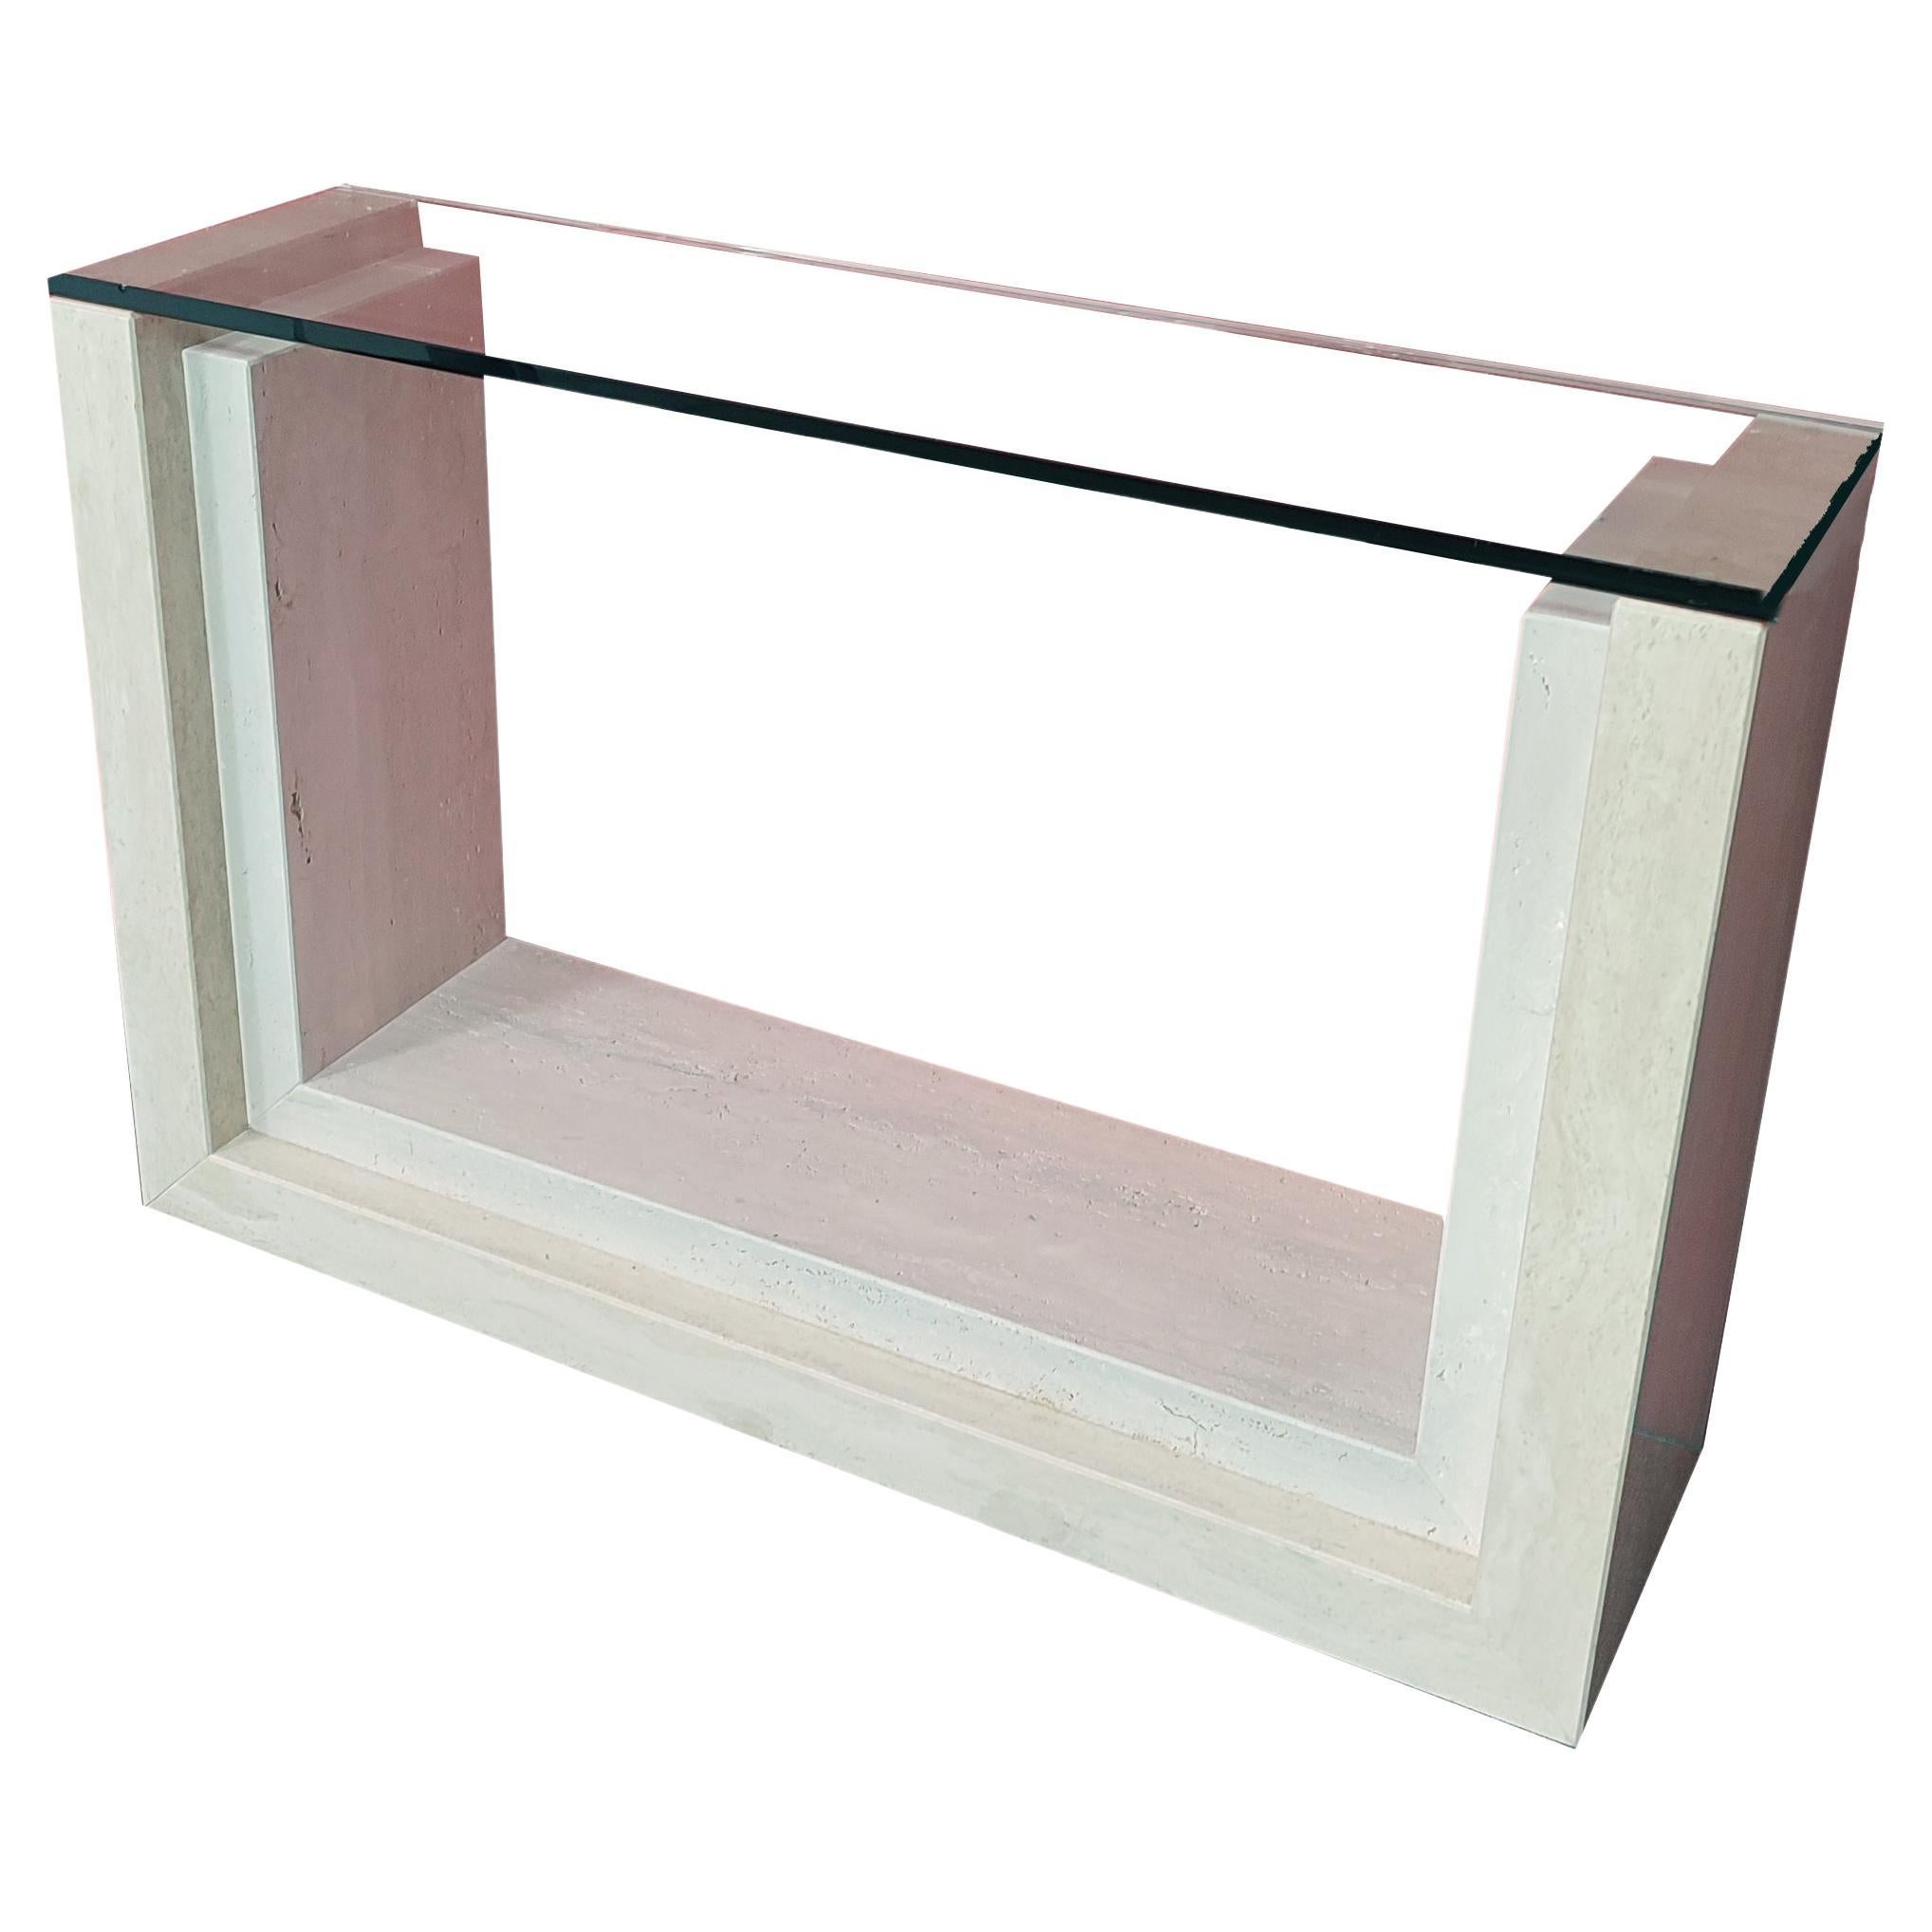 Feles Marble Travertine Console Table Natural & Matte Travertine in Stock Meddel